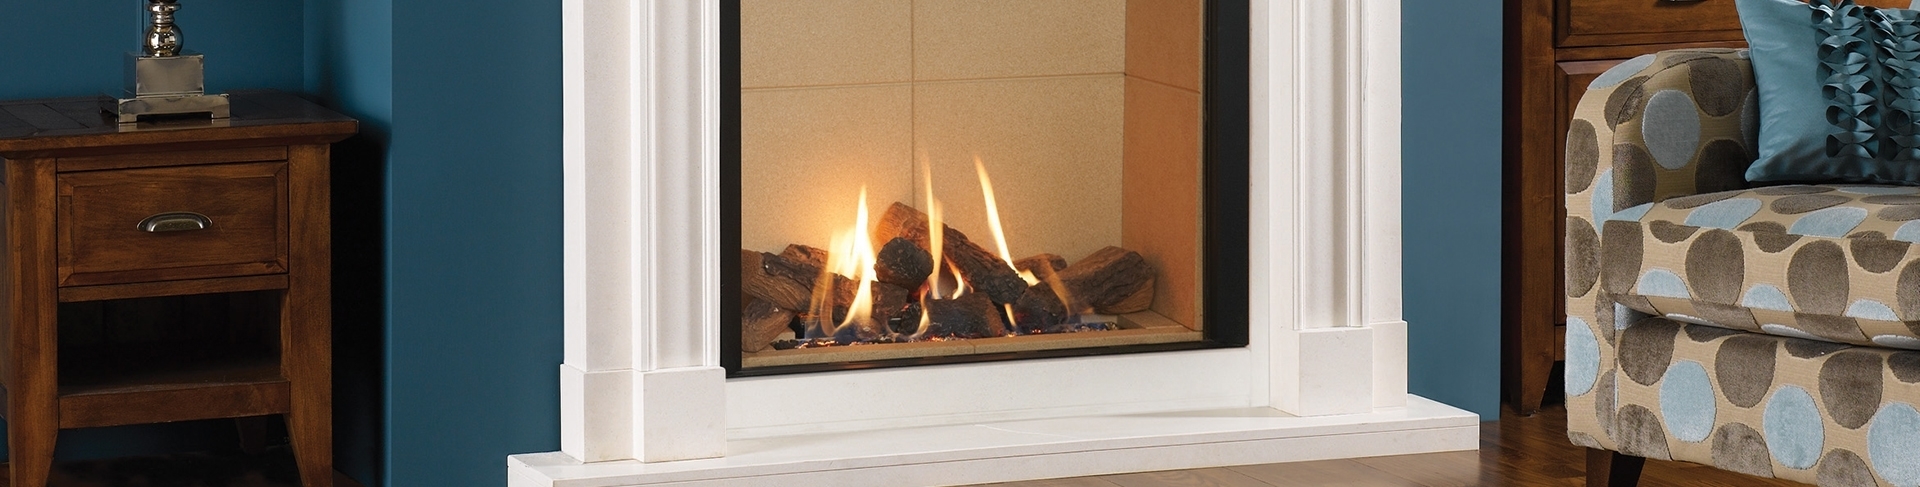 Who Fixes Gas Fireplaces Awesome the London Fireplaces